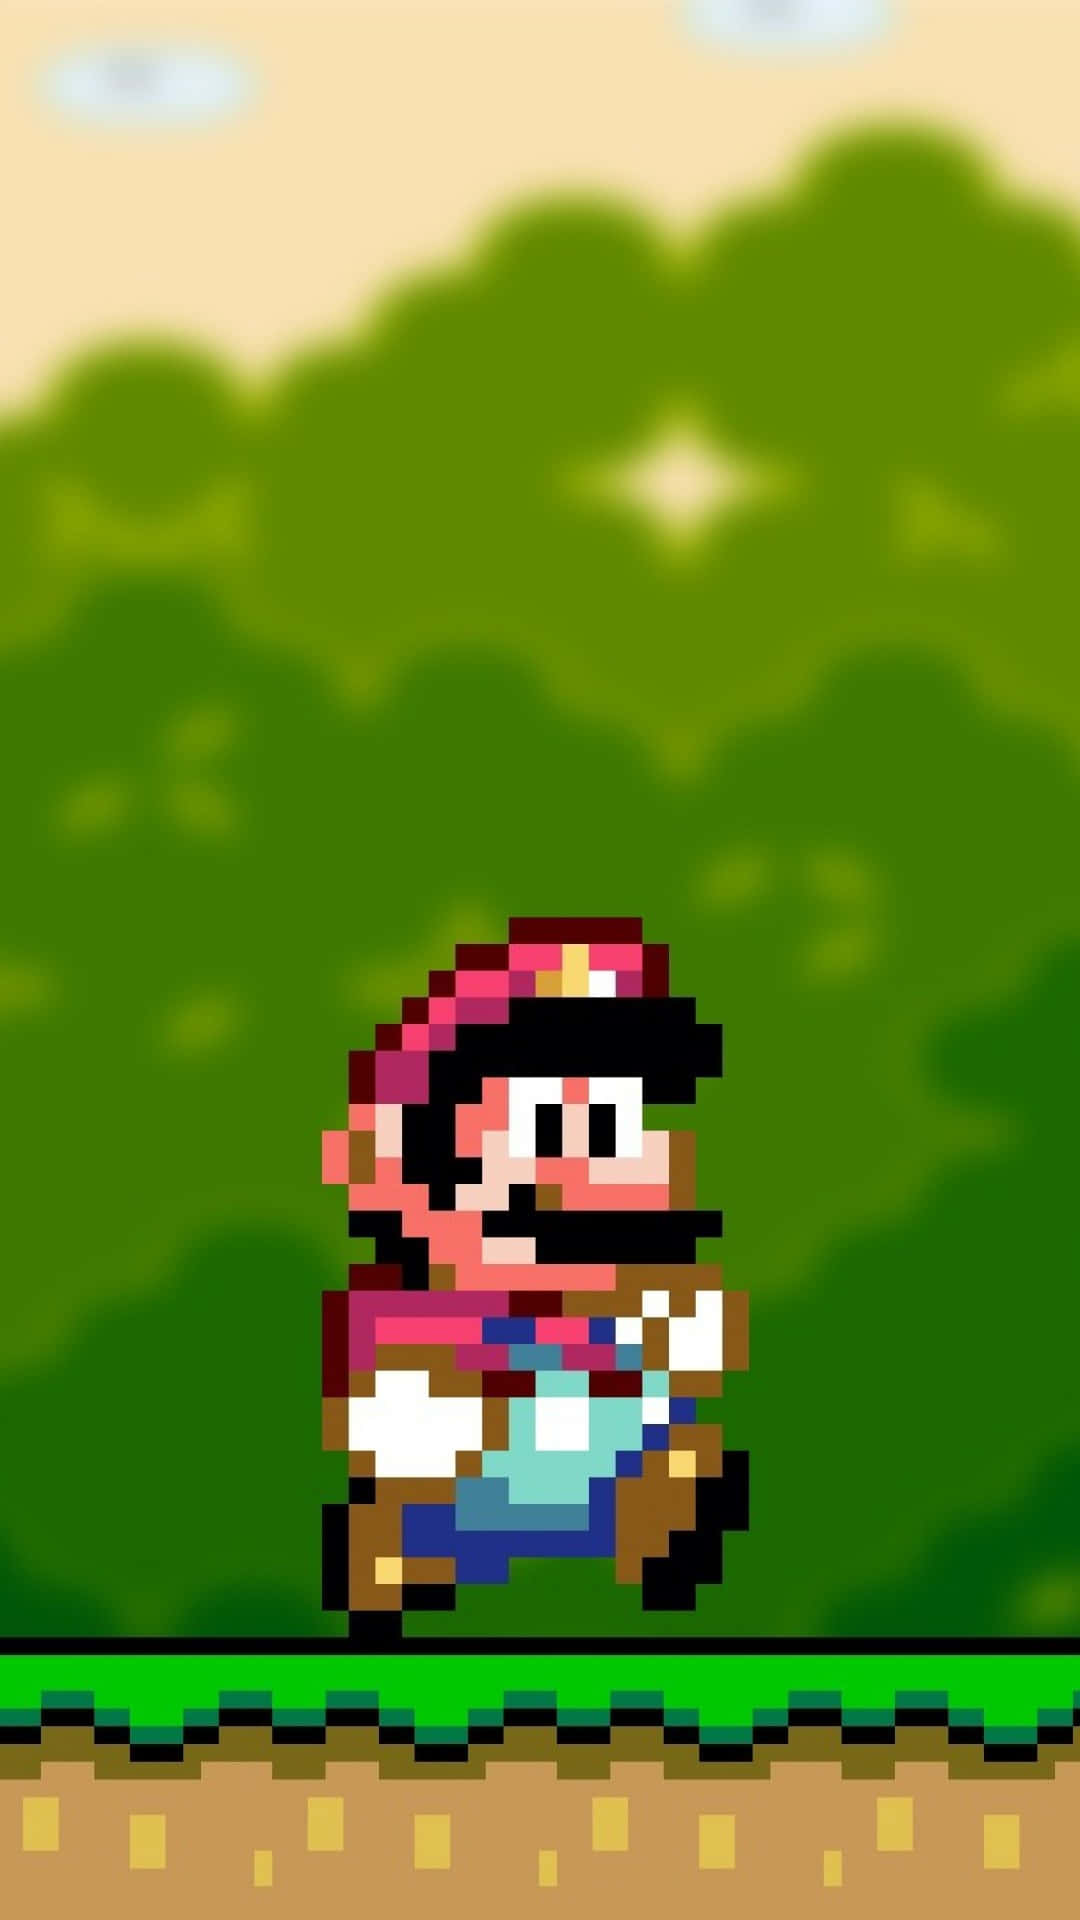 A Pixelated Image Of Mario Running Through A Forest Wallpaper